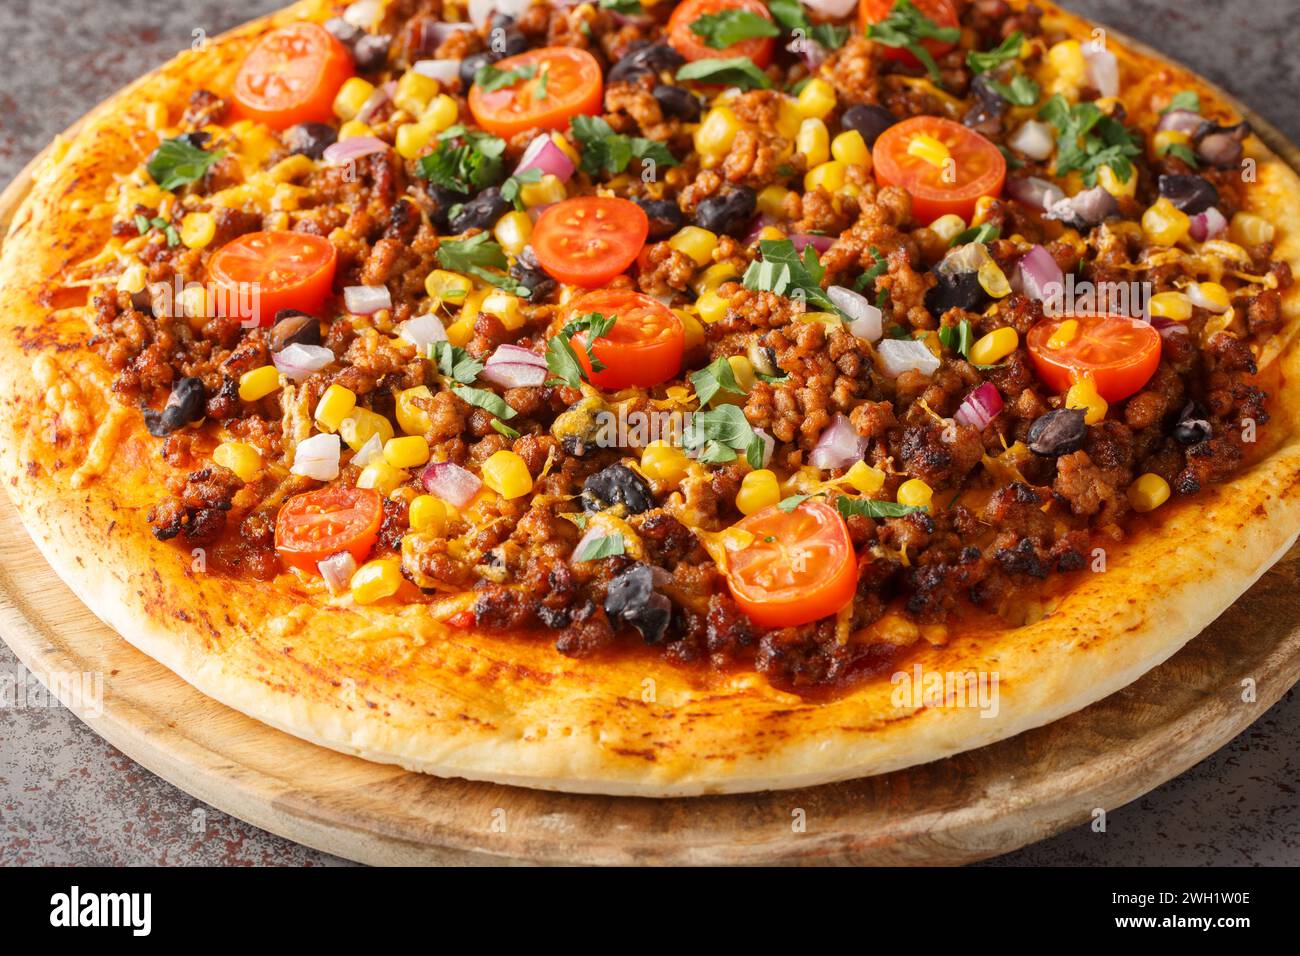 Hot Tex Mex taco pizza with ground beef, salsa, cheddar cheese and Mexican spices close-up on a wooden board on the table. Horizontal Stock Photo